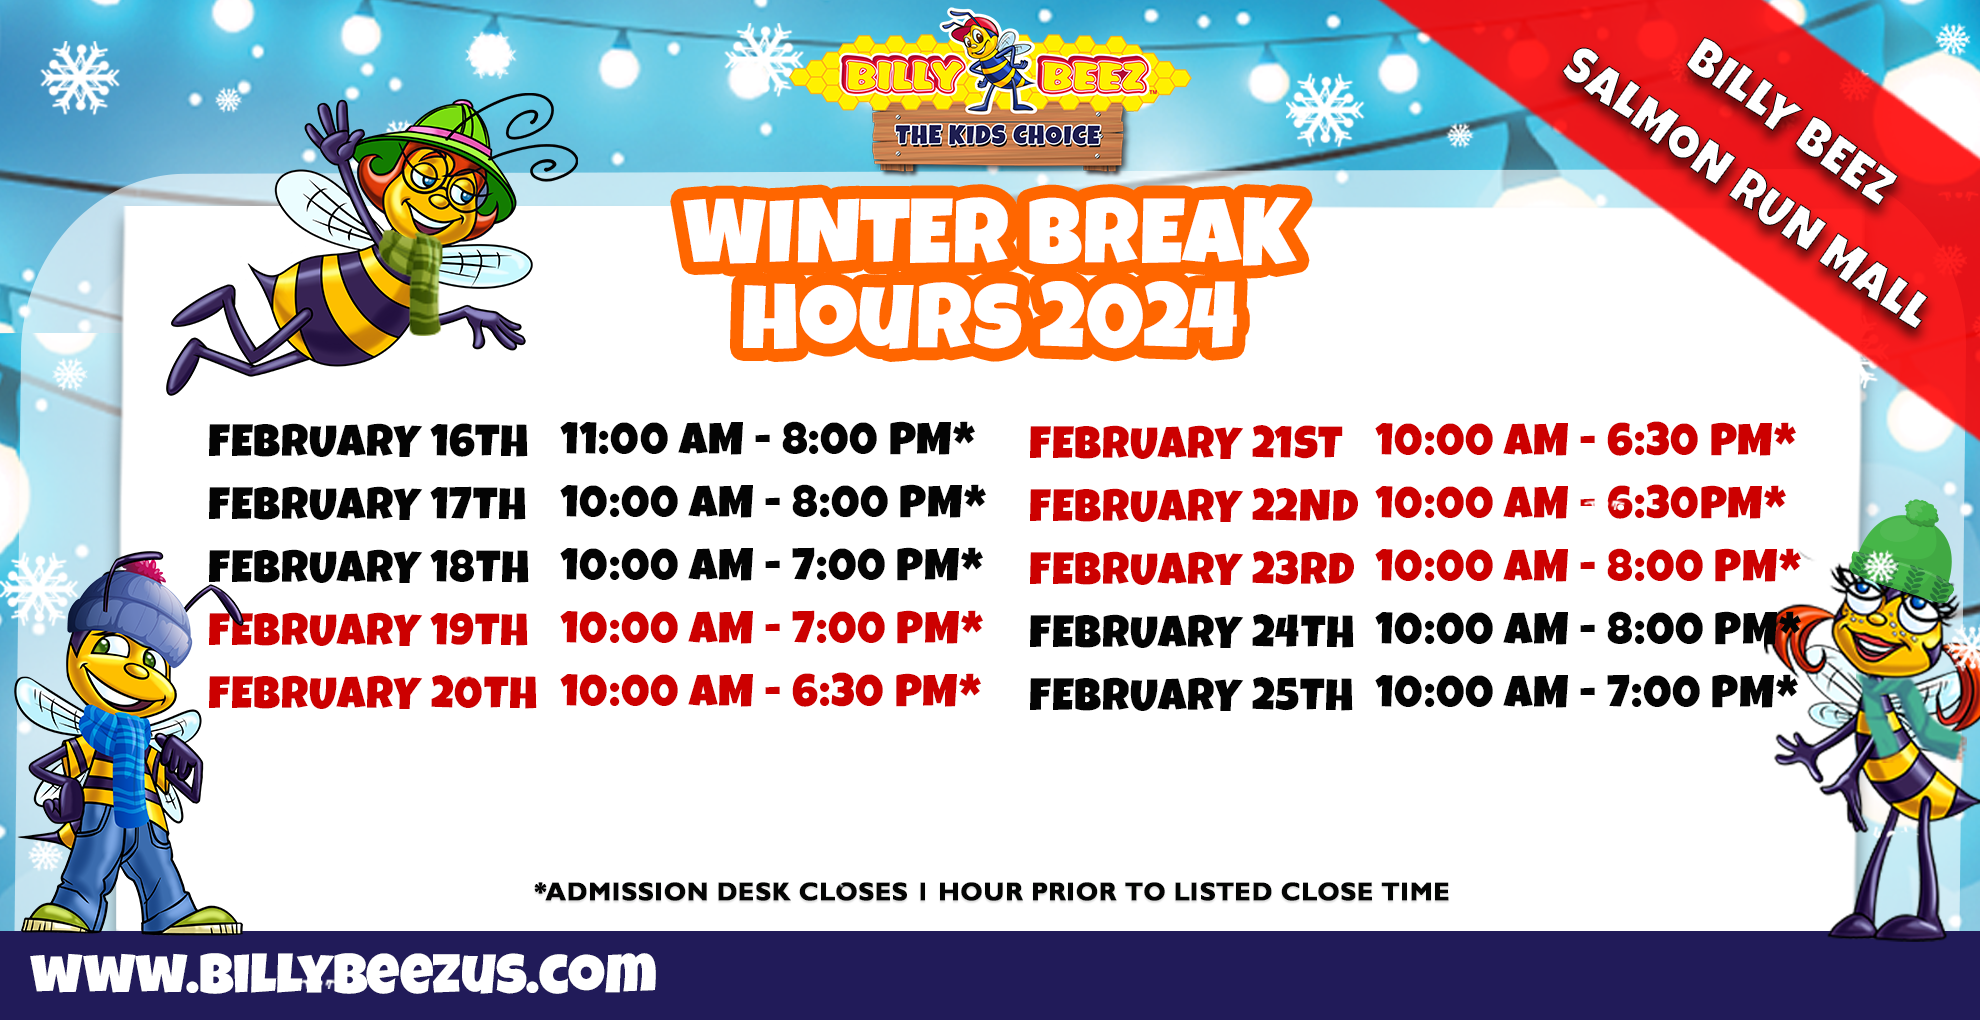 Billy Beez The Kids Choice Billy Beez Salmon Run Mall Winter Break Hours 2024 February 16th 11:00am - 8:00pm* February 17th 10:00am - 8:00pm* February 18th 10:00am - 7:00pm* February 19th 10:00am- 7:00pm* February 20th 10:00am - 6:30pm* February 21st 10:00am - 6:30pm* Febraury 22nd 10:00am - 6:30pm* February 23rd 10:00am - 8:00pm* February 24th 10:00am - 8:00pm* February 25th 10:00am - 7:00pm* *Admission desk closes 1 hour prior to listed close time* www.billybeezus.com